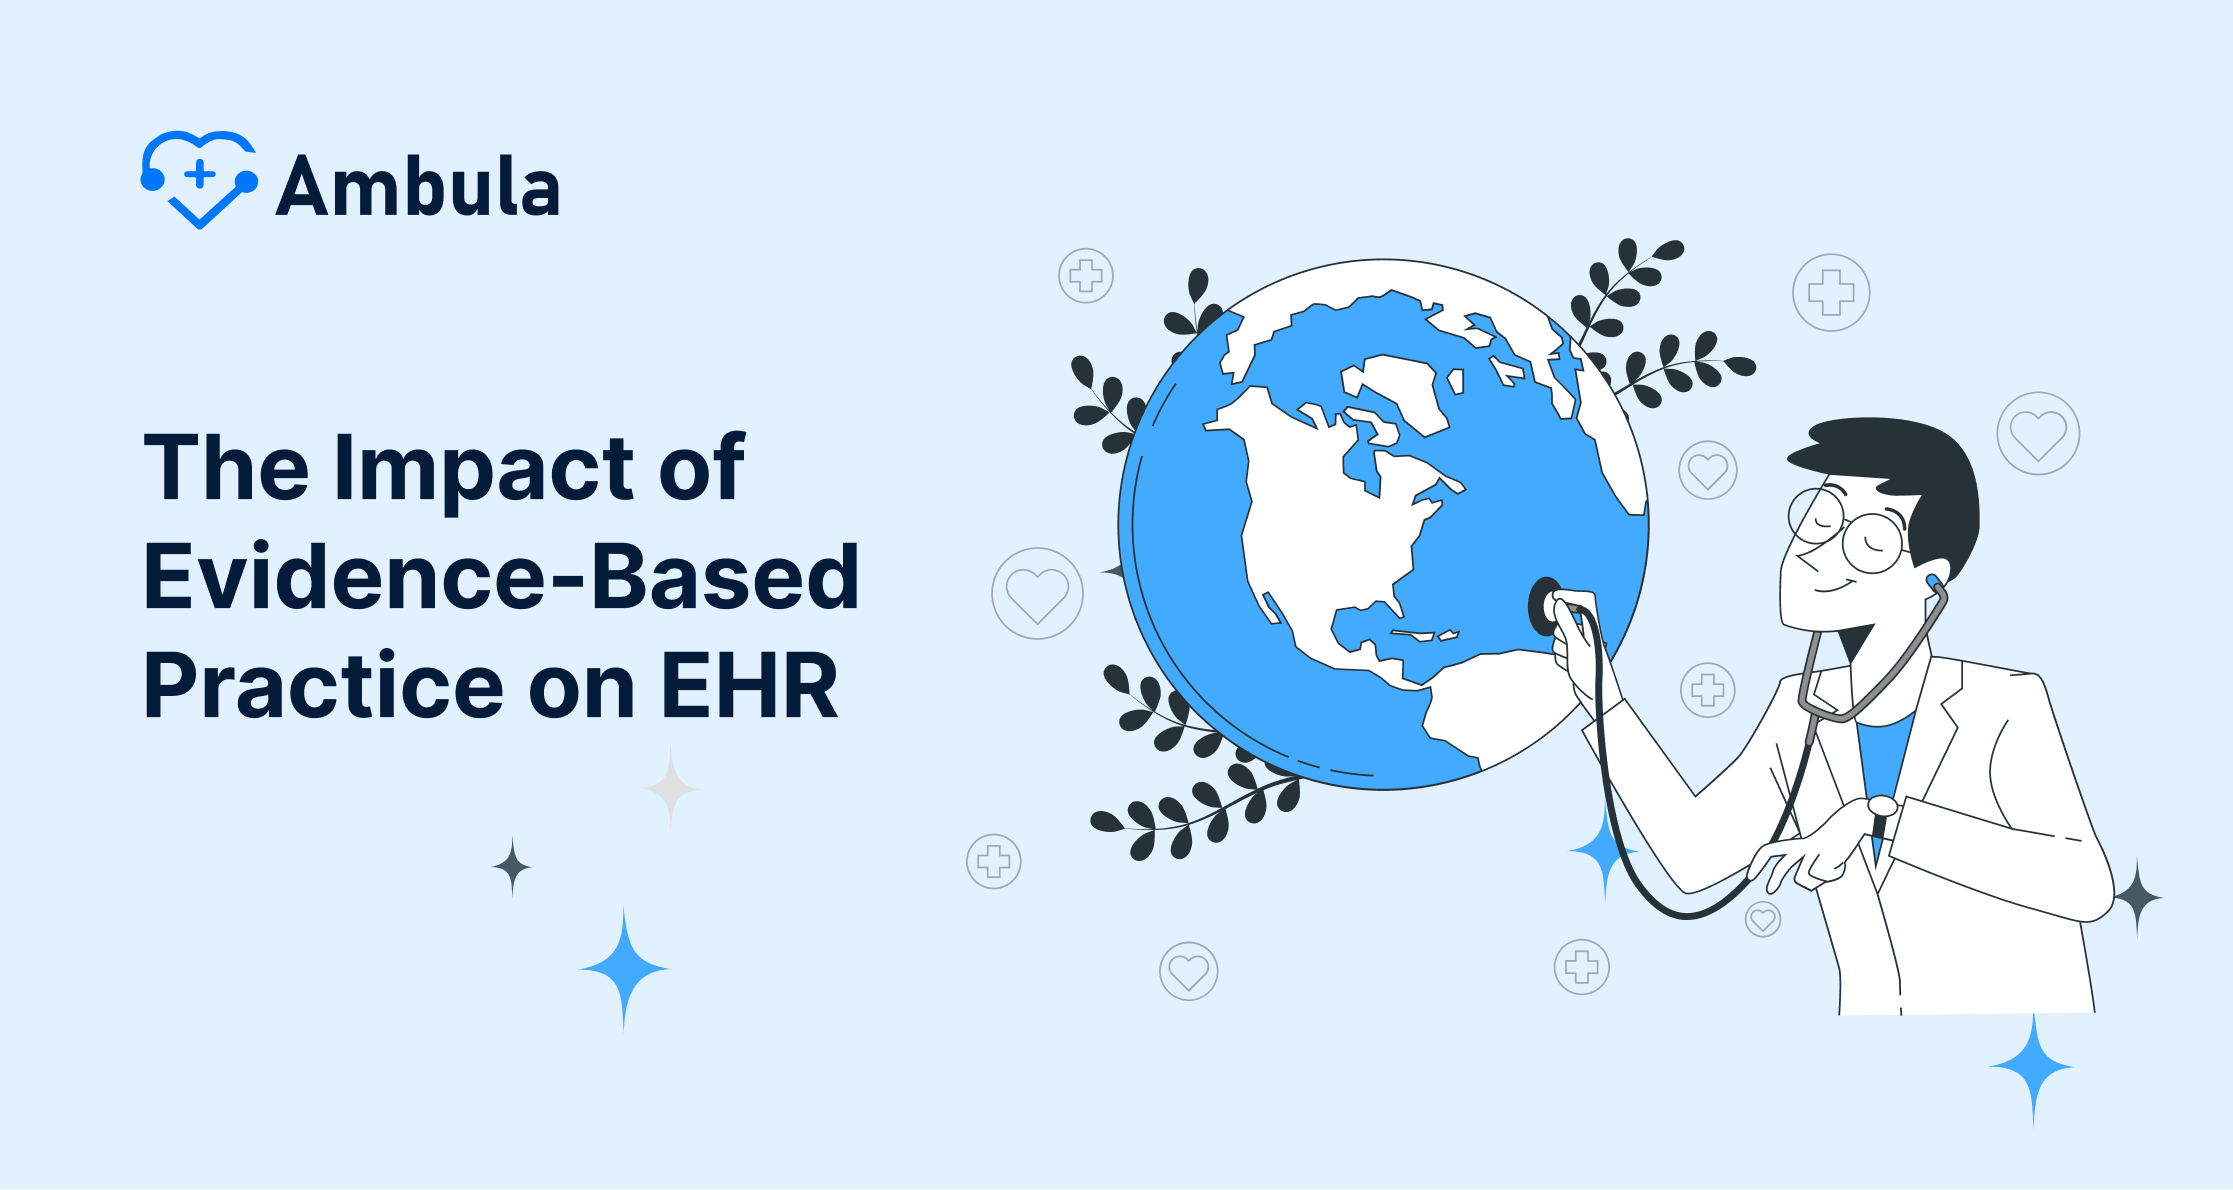 The Impact of Evidence-Based Practice on EHR